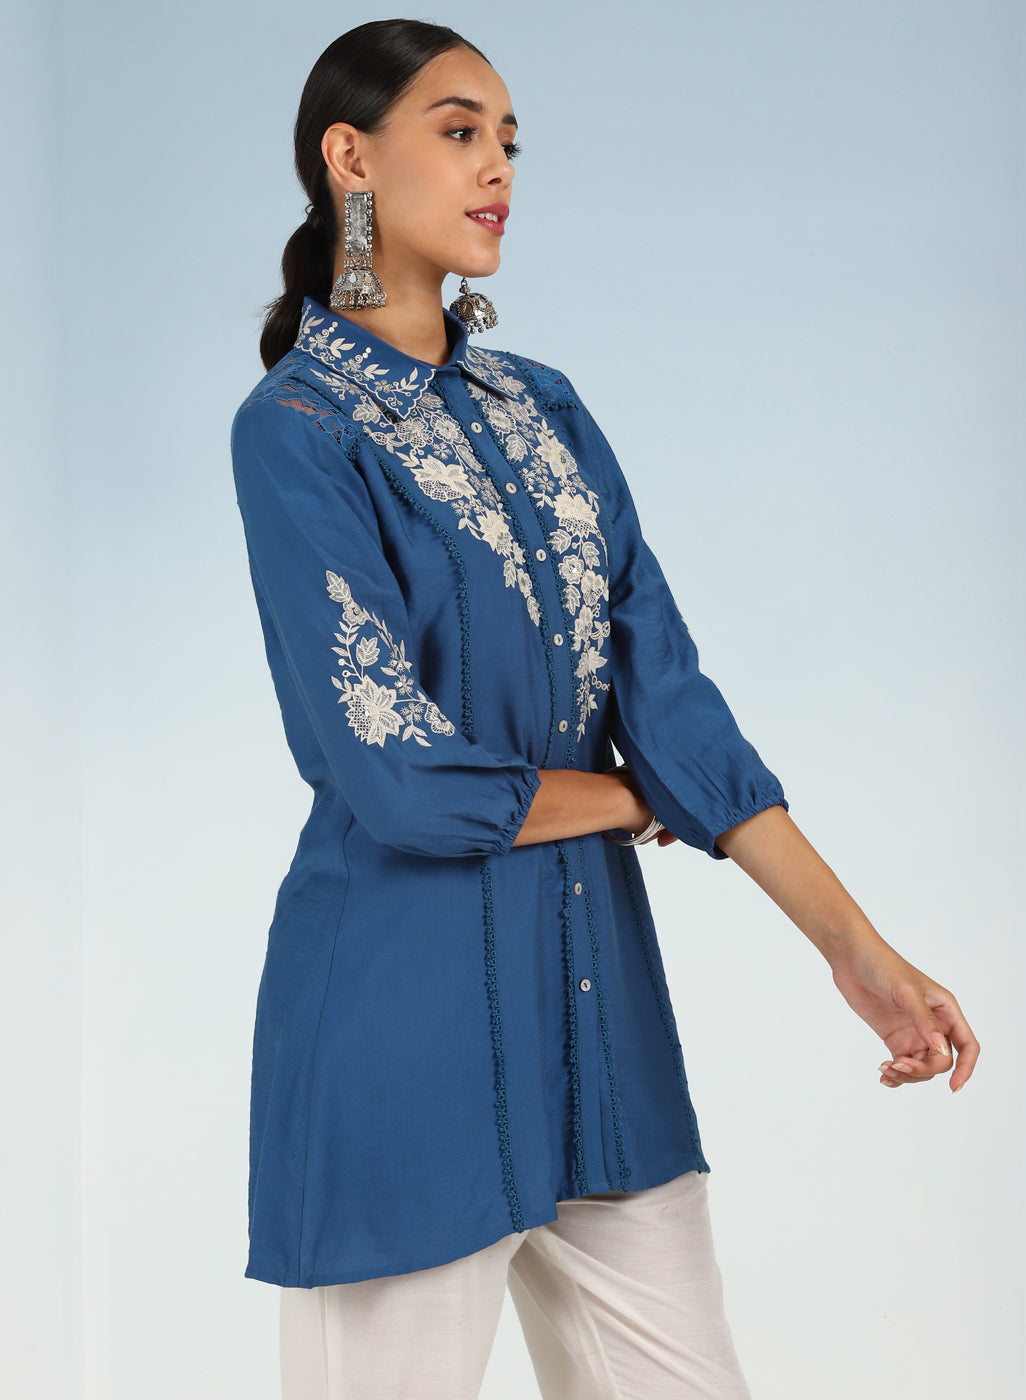 Blue Collared Tunic for Women with Puffed Sleeves-23AWLK04156-4 – Lakshita